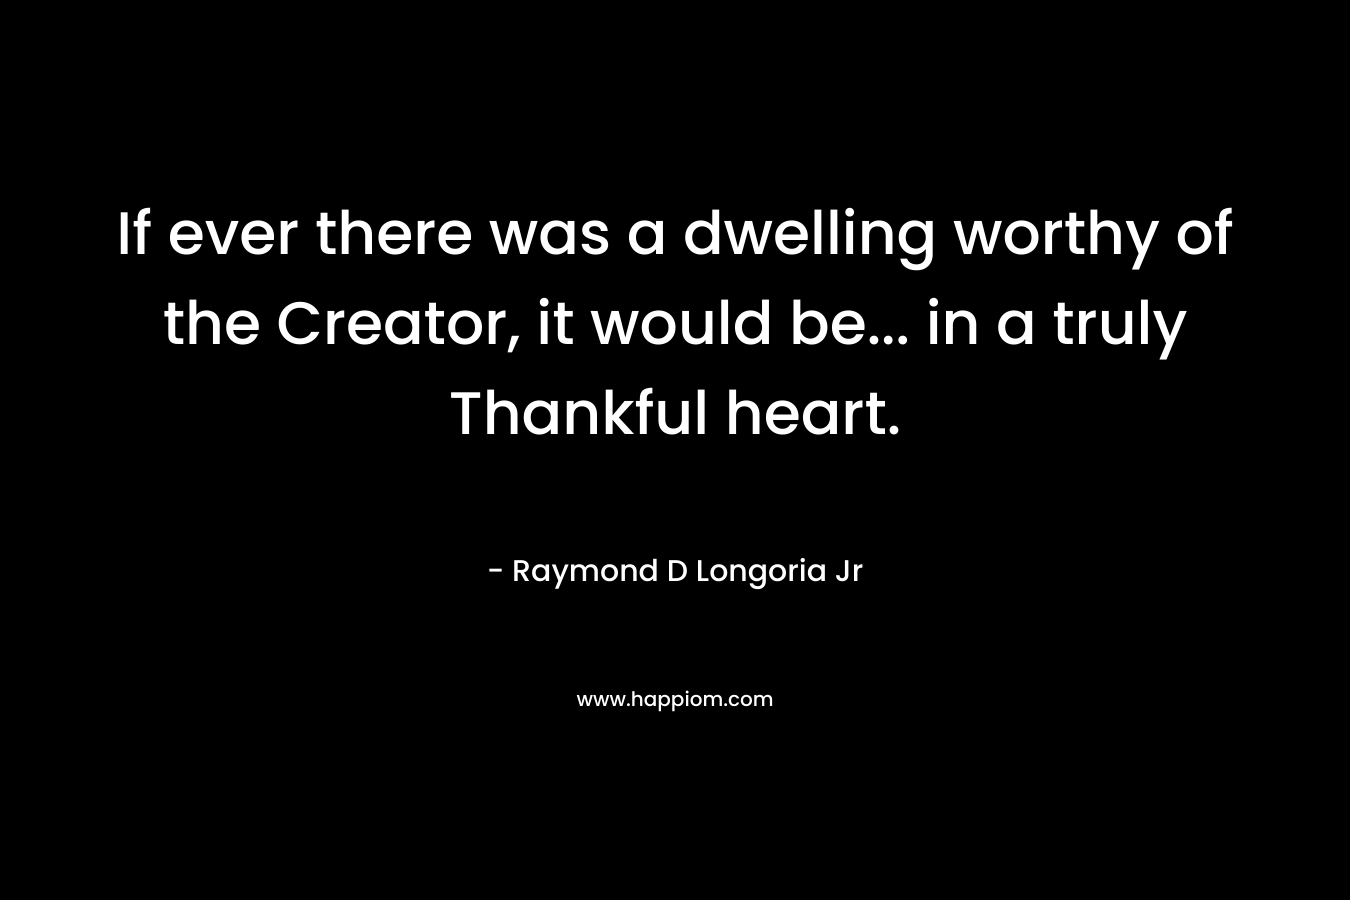 If ever there was a dwelling worthy of the Creator, it would be… in a truly Thankful heart. – Raymond D Longoria Jr